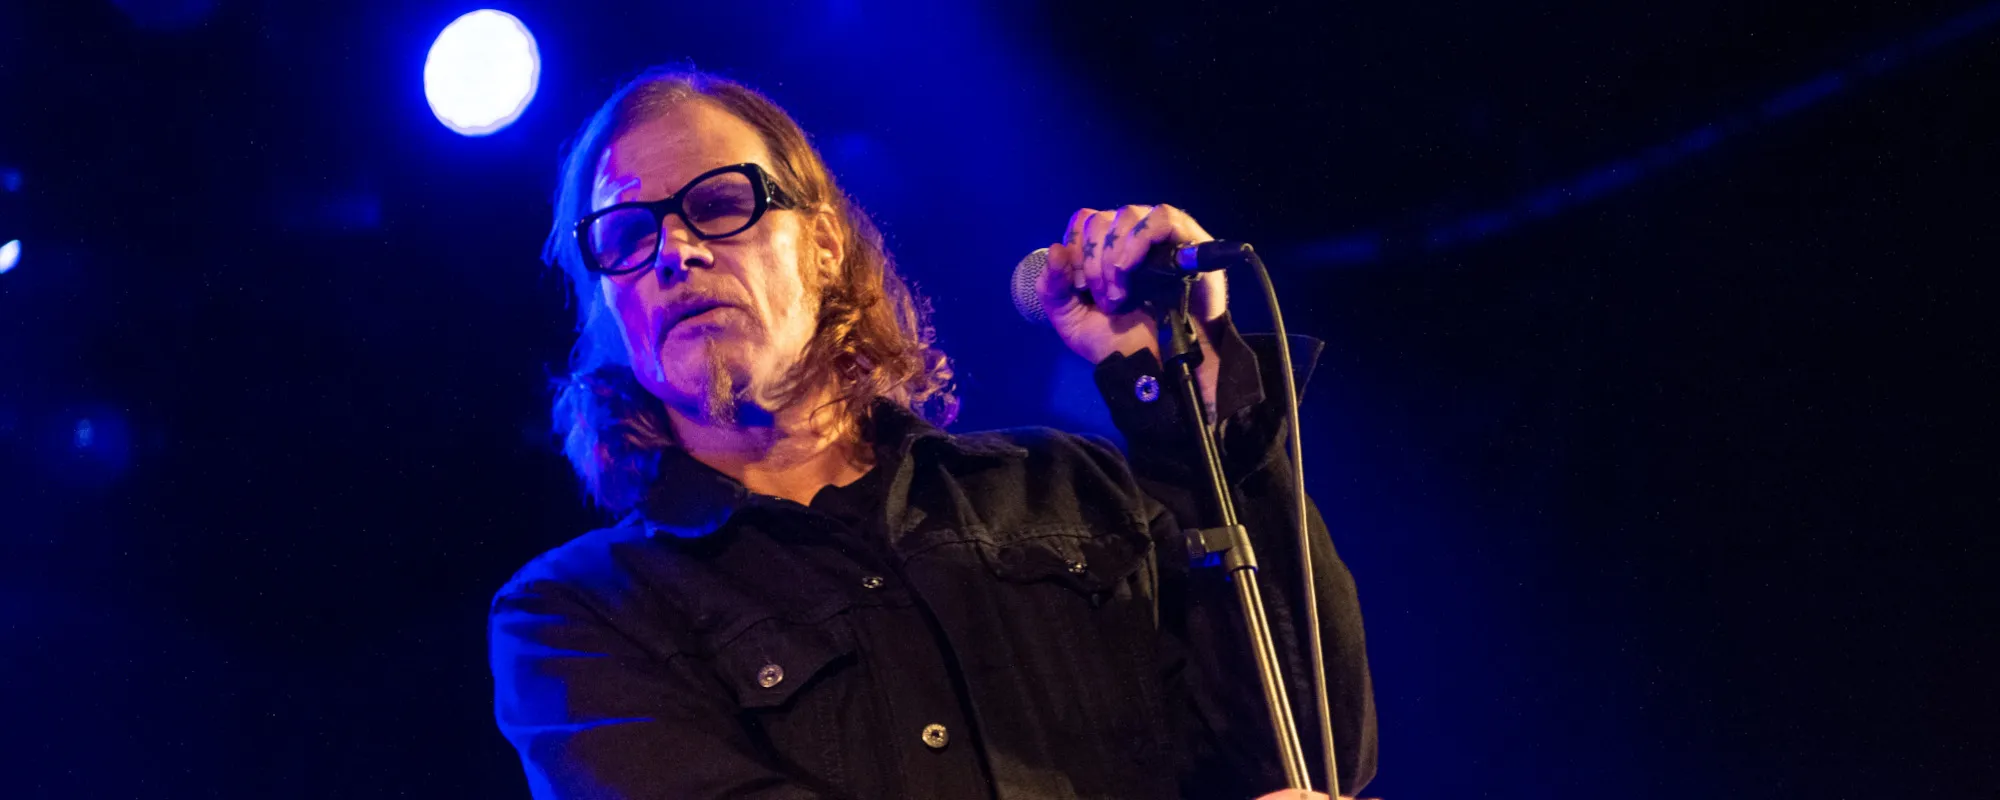 4 Songs You Didn’t Know Mark Lanegan Wrote for Other Artists